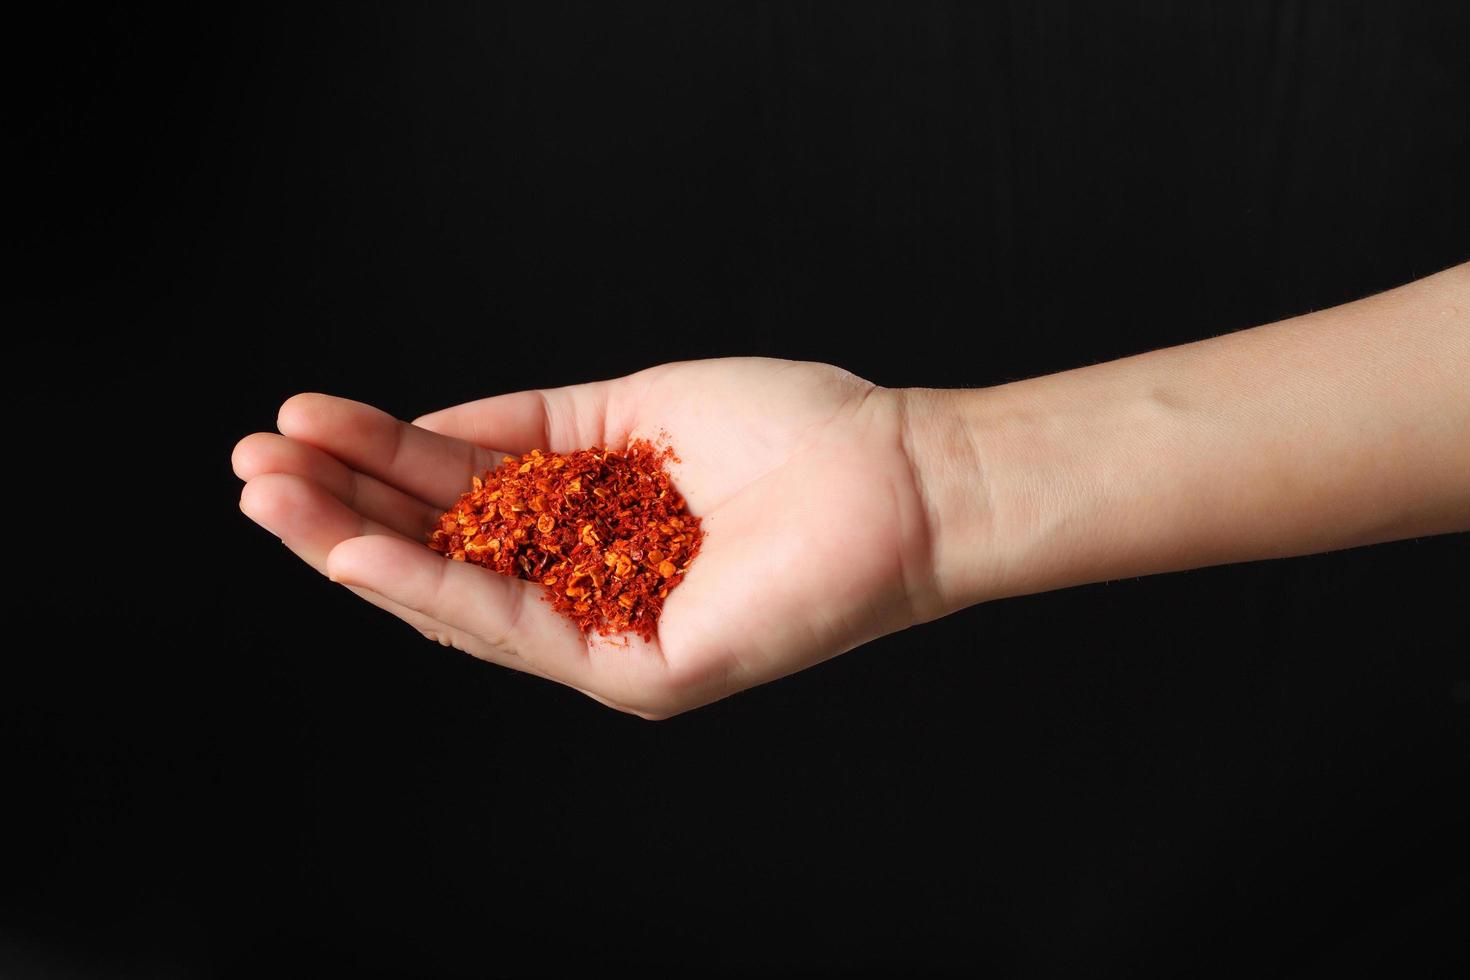 Hand holding cayenne pepper on black background photo